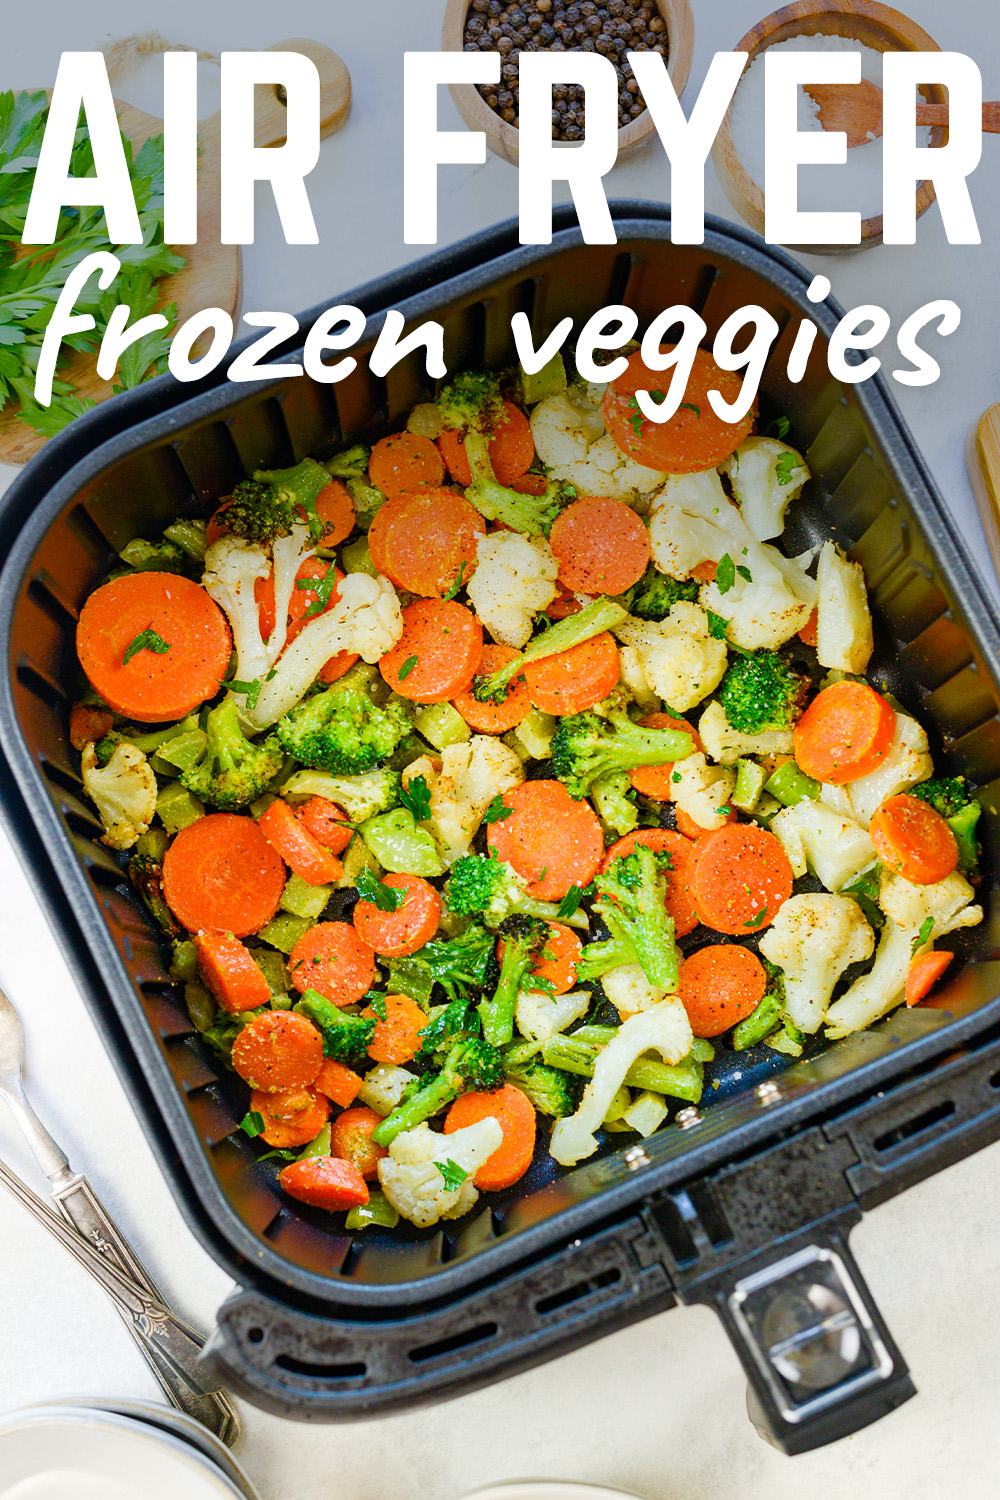 These frozen veggies are easy to cook evenly and easily in the air fryer!  We also show you a simple seasoning that makes them taste so good in this healthy side dish!